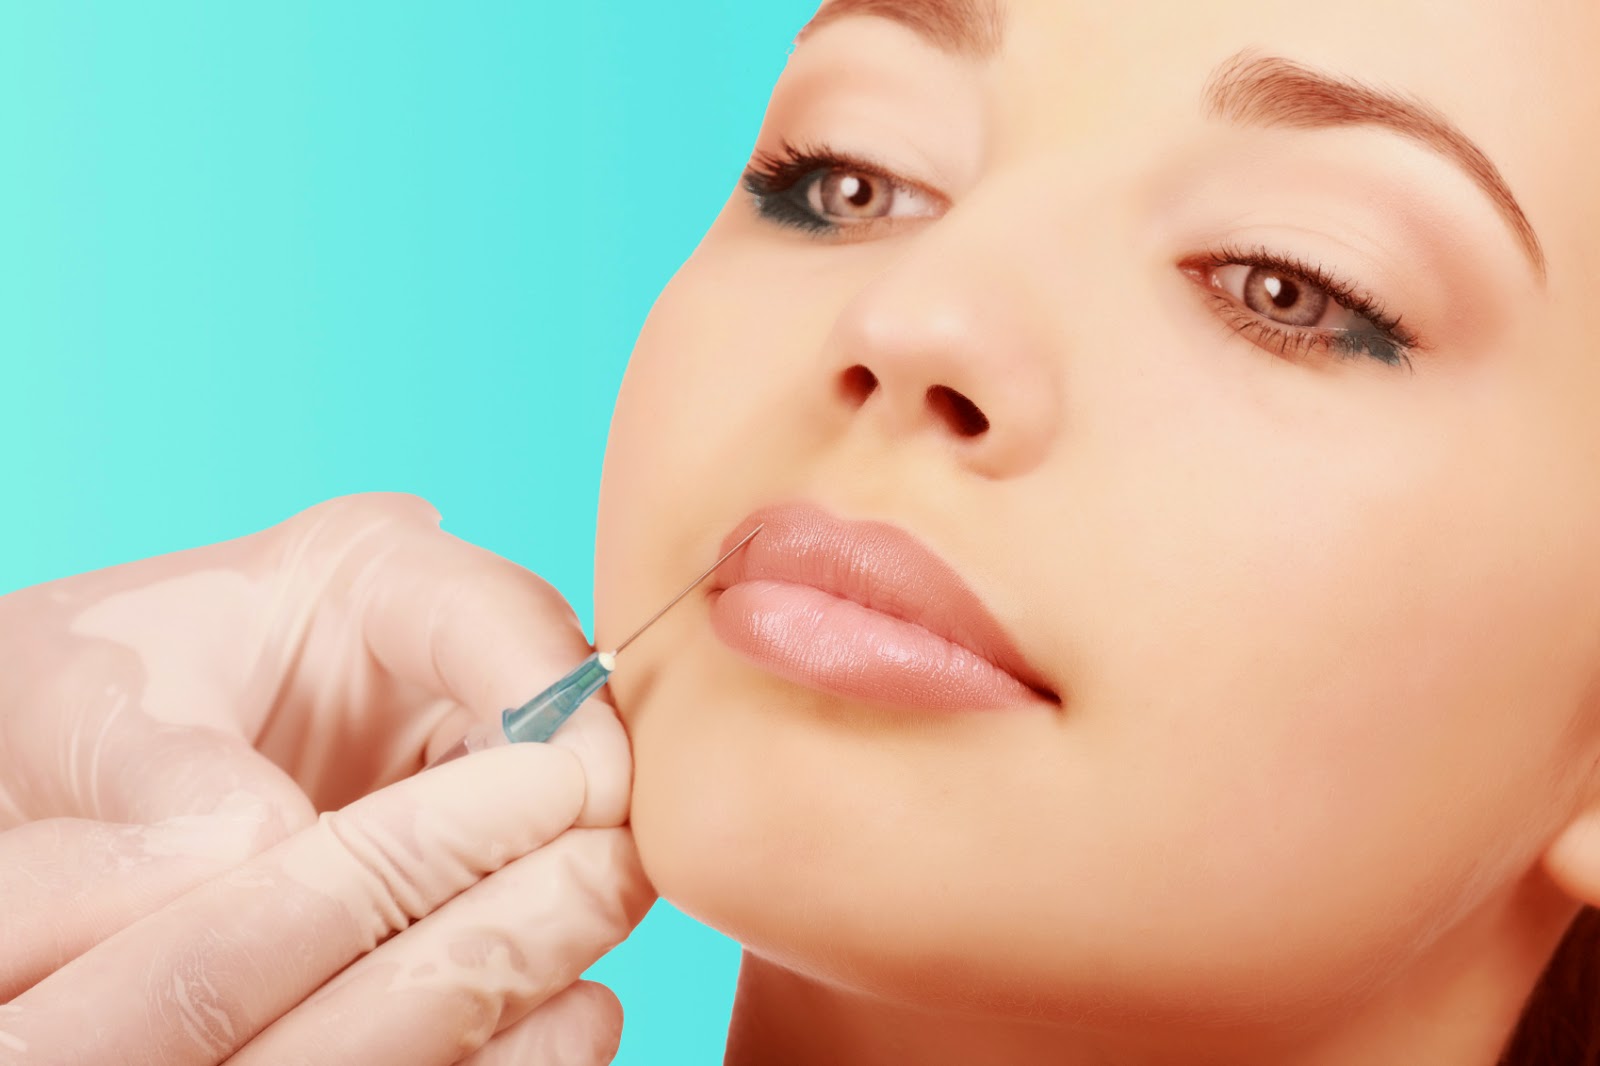 botox-therapy-how-to-go-for-it-dental-blog-latest-dental-news-and